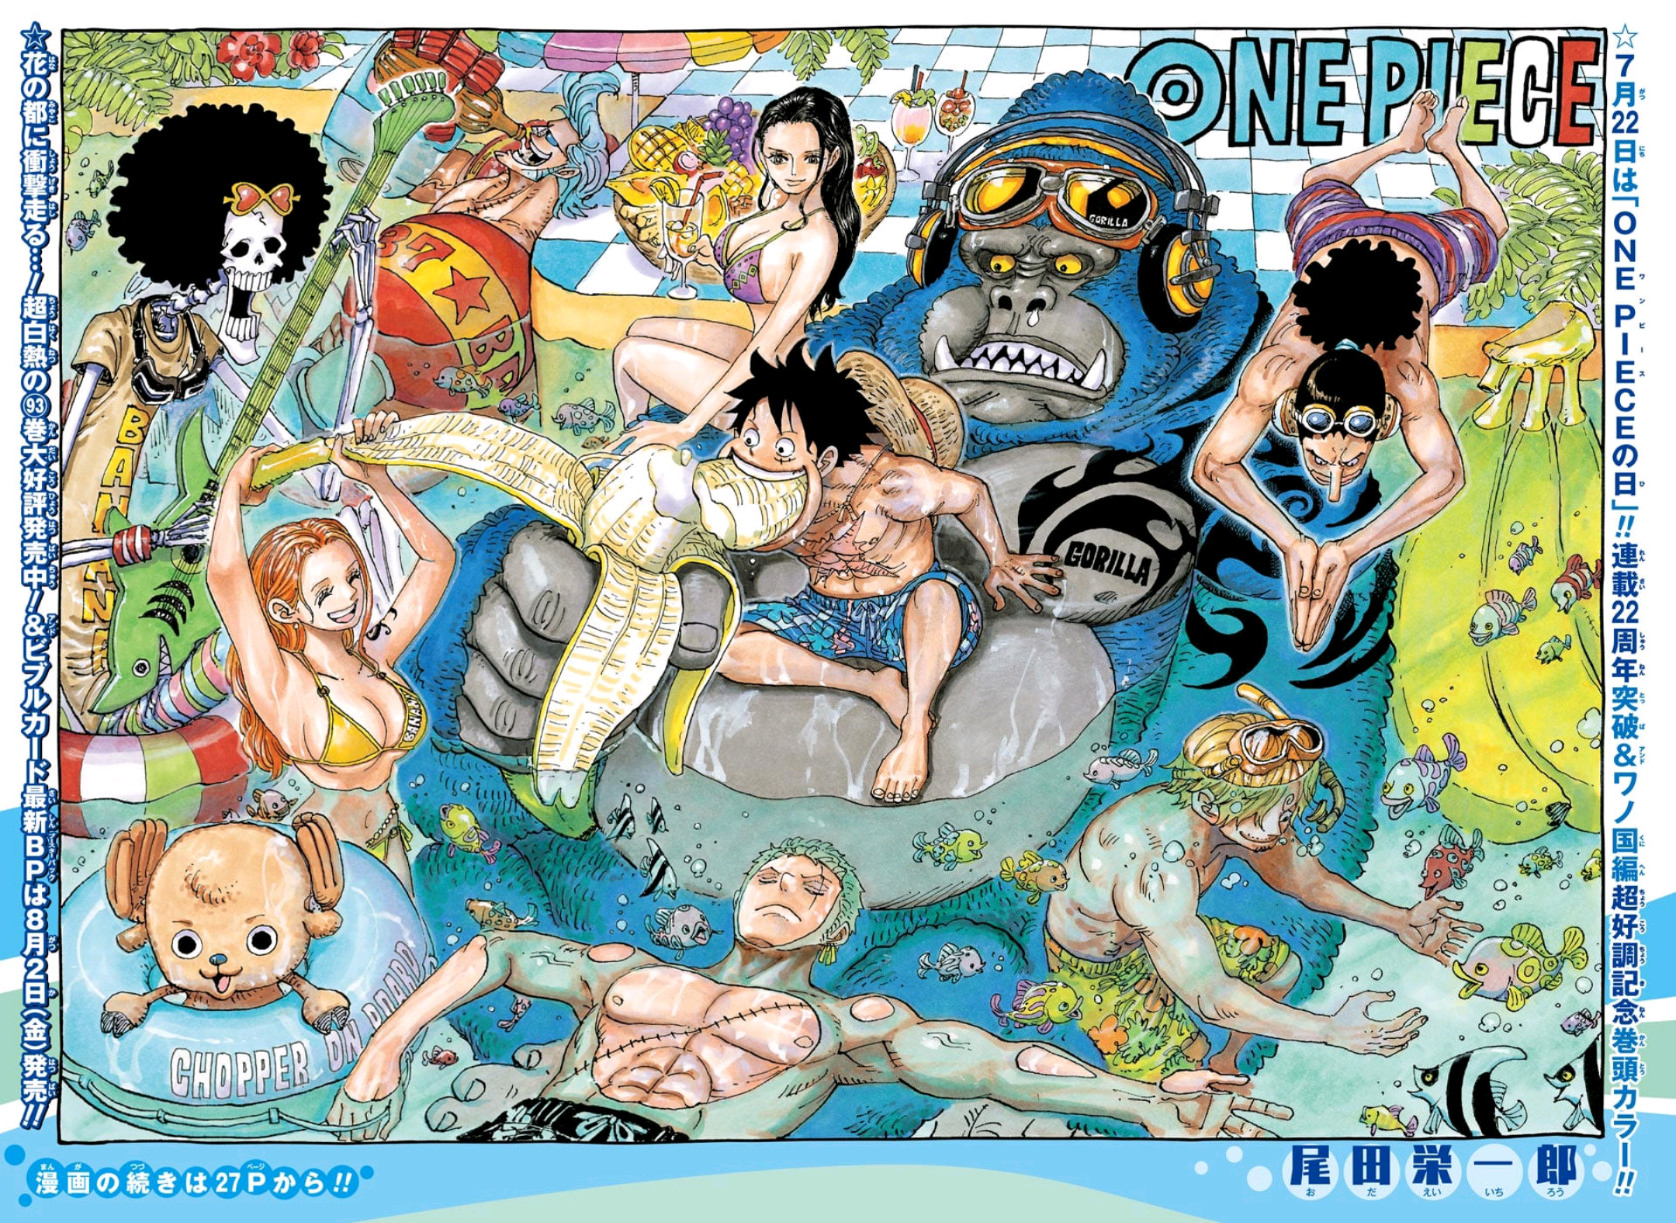 Chapter 987, One Piece Wiki